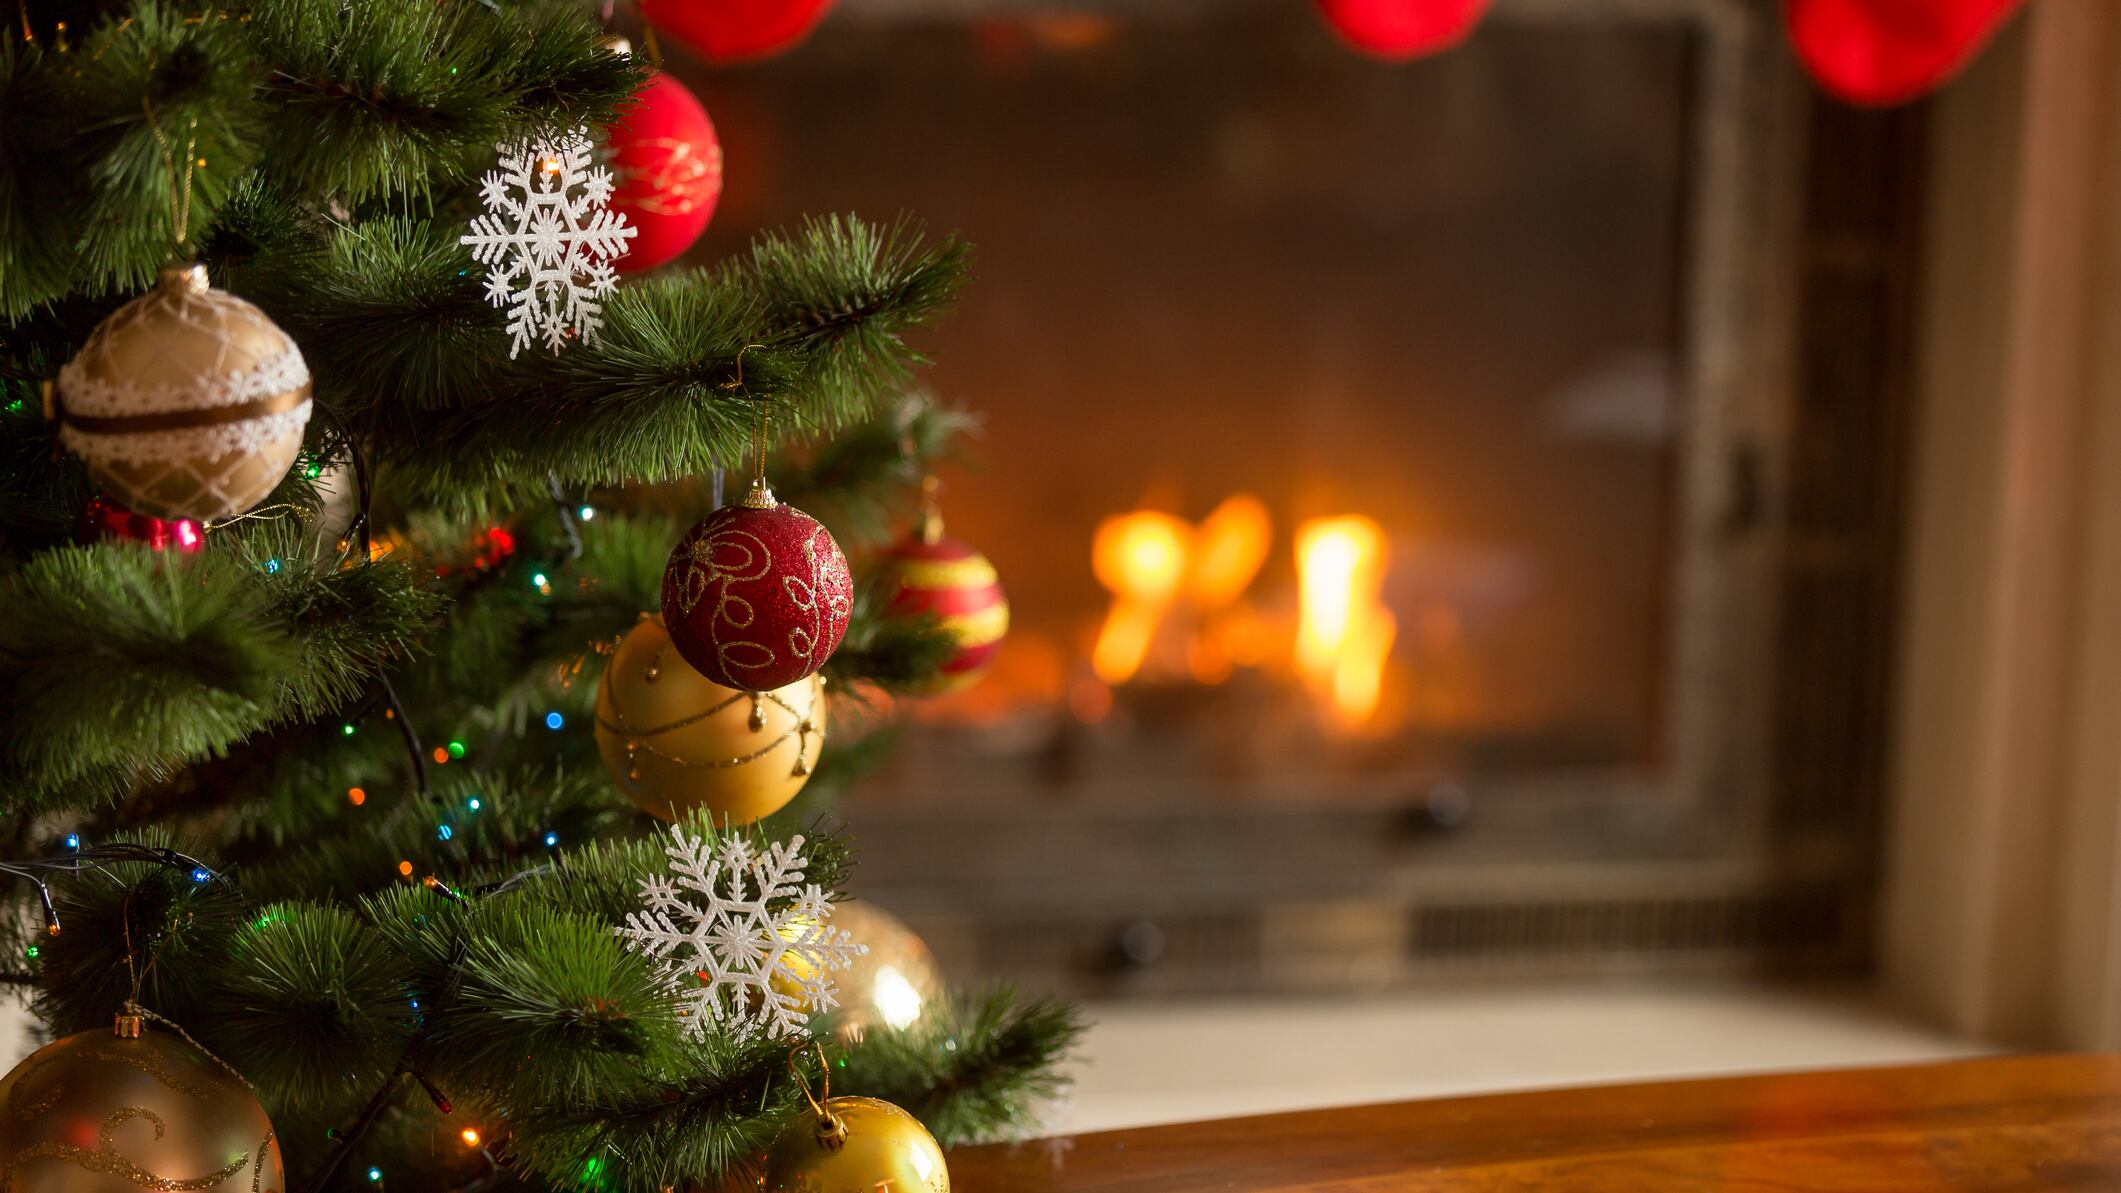 The Christmas tree is one of the most famous Christmas traditions (Artfoliophoto/Getty Images)